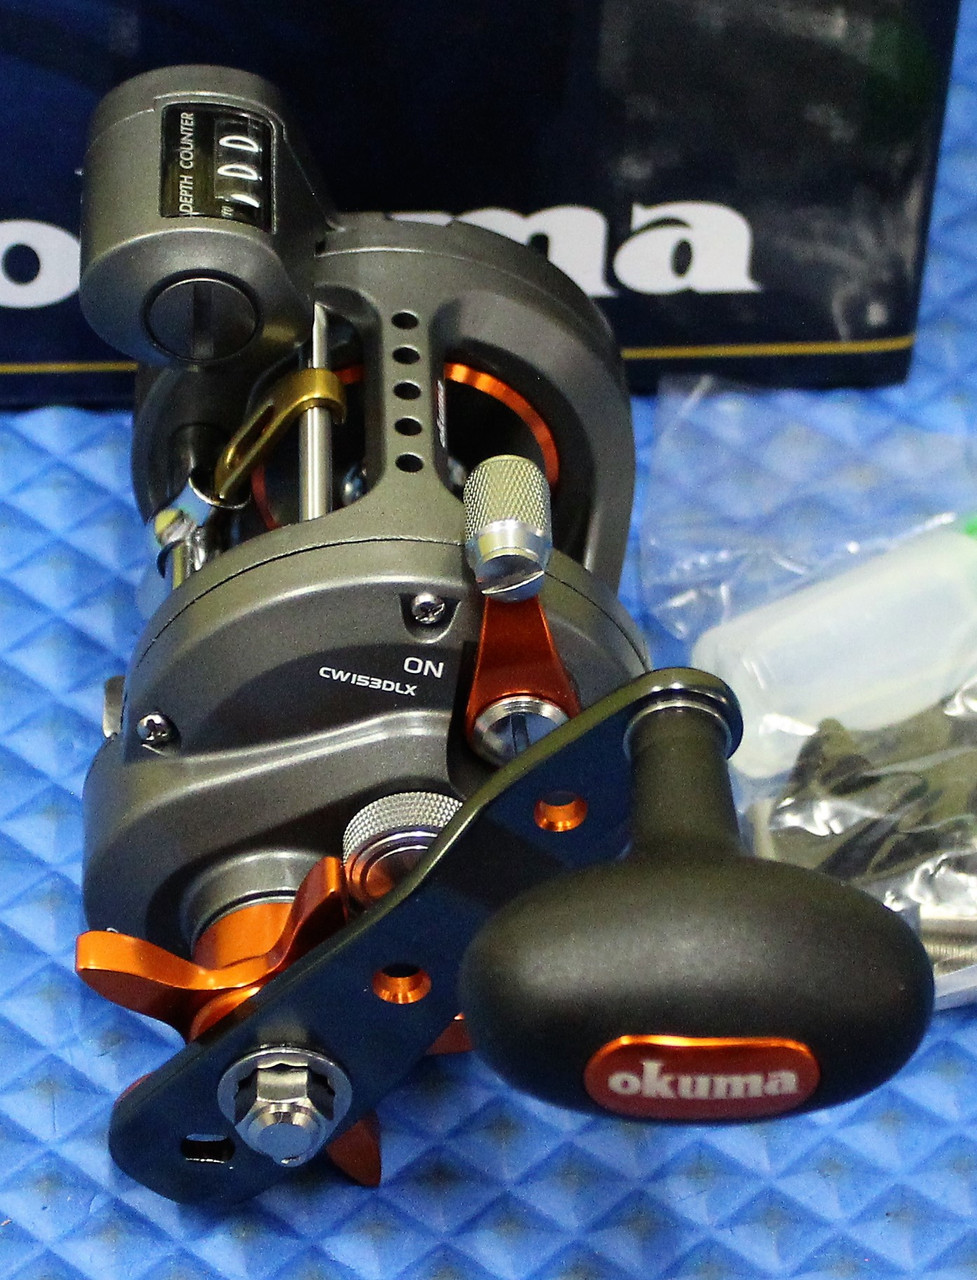 Okuma Cold Water 303D round baitcasting fishing reel how to service 